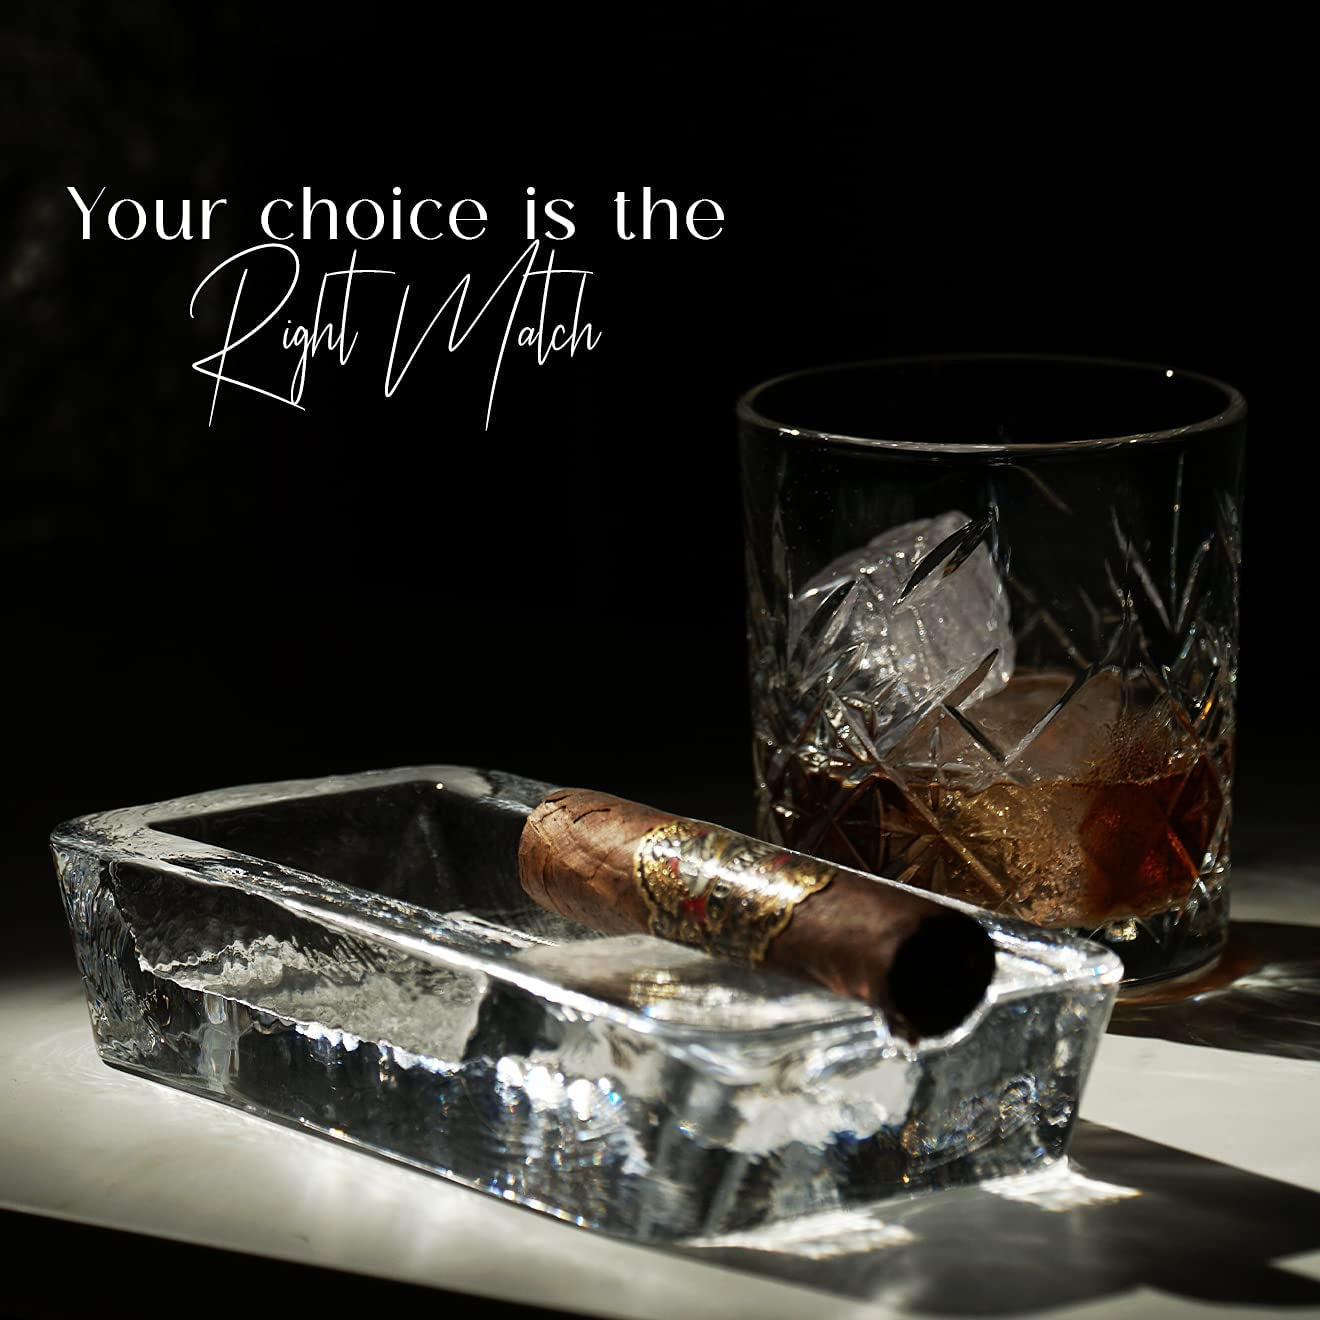 The Buybox Cigar Ashtray Big Ashtrays for Cigarettes Outdoors Large Heavy Glass for Patio/Outdoors/Cigars Ash Tray Large Giant Luxury Premium Cigarette Ashtrays for Outdoor Party Restaurant & Pool